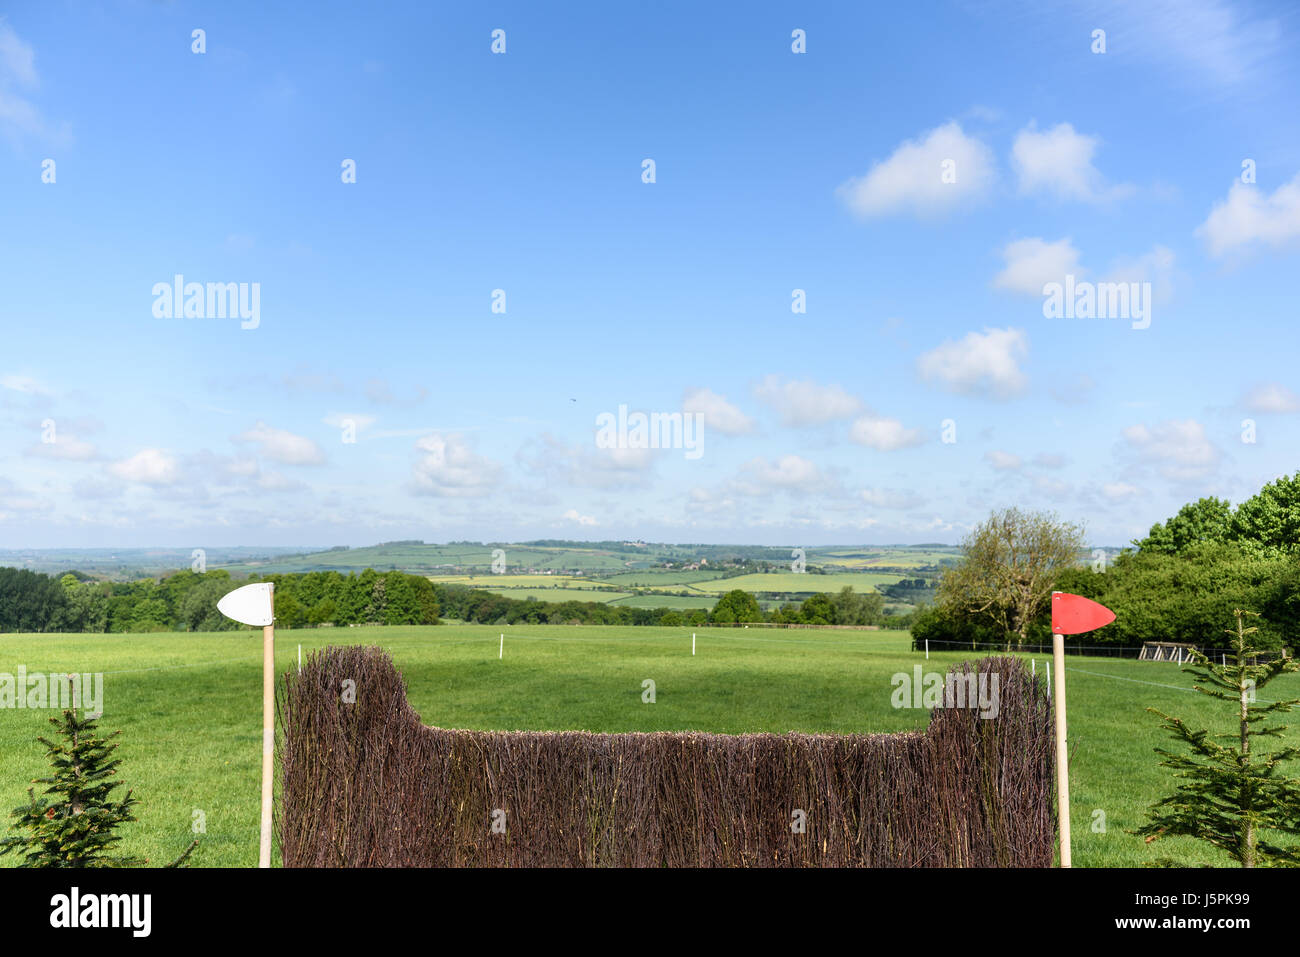 Rockingham Castle, Corby, England. 18th May 2017. A view of obstacles during a sunny and cloudy day on an empty cross country course in the grounds of Rockingham Castle as riders take part in the dressage event. Credit: miscellany/Alamy Live News Stock Photo